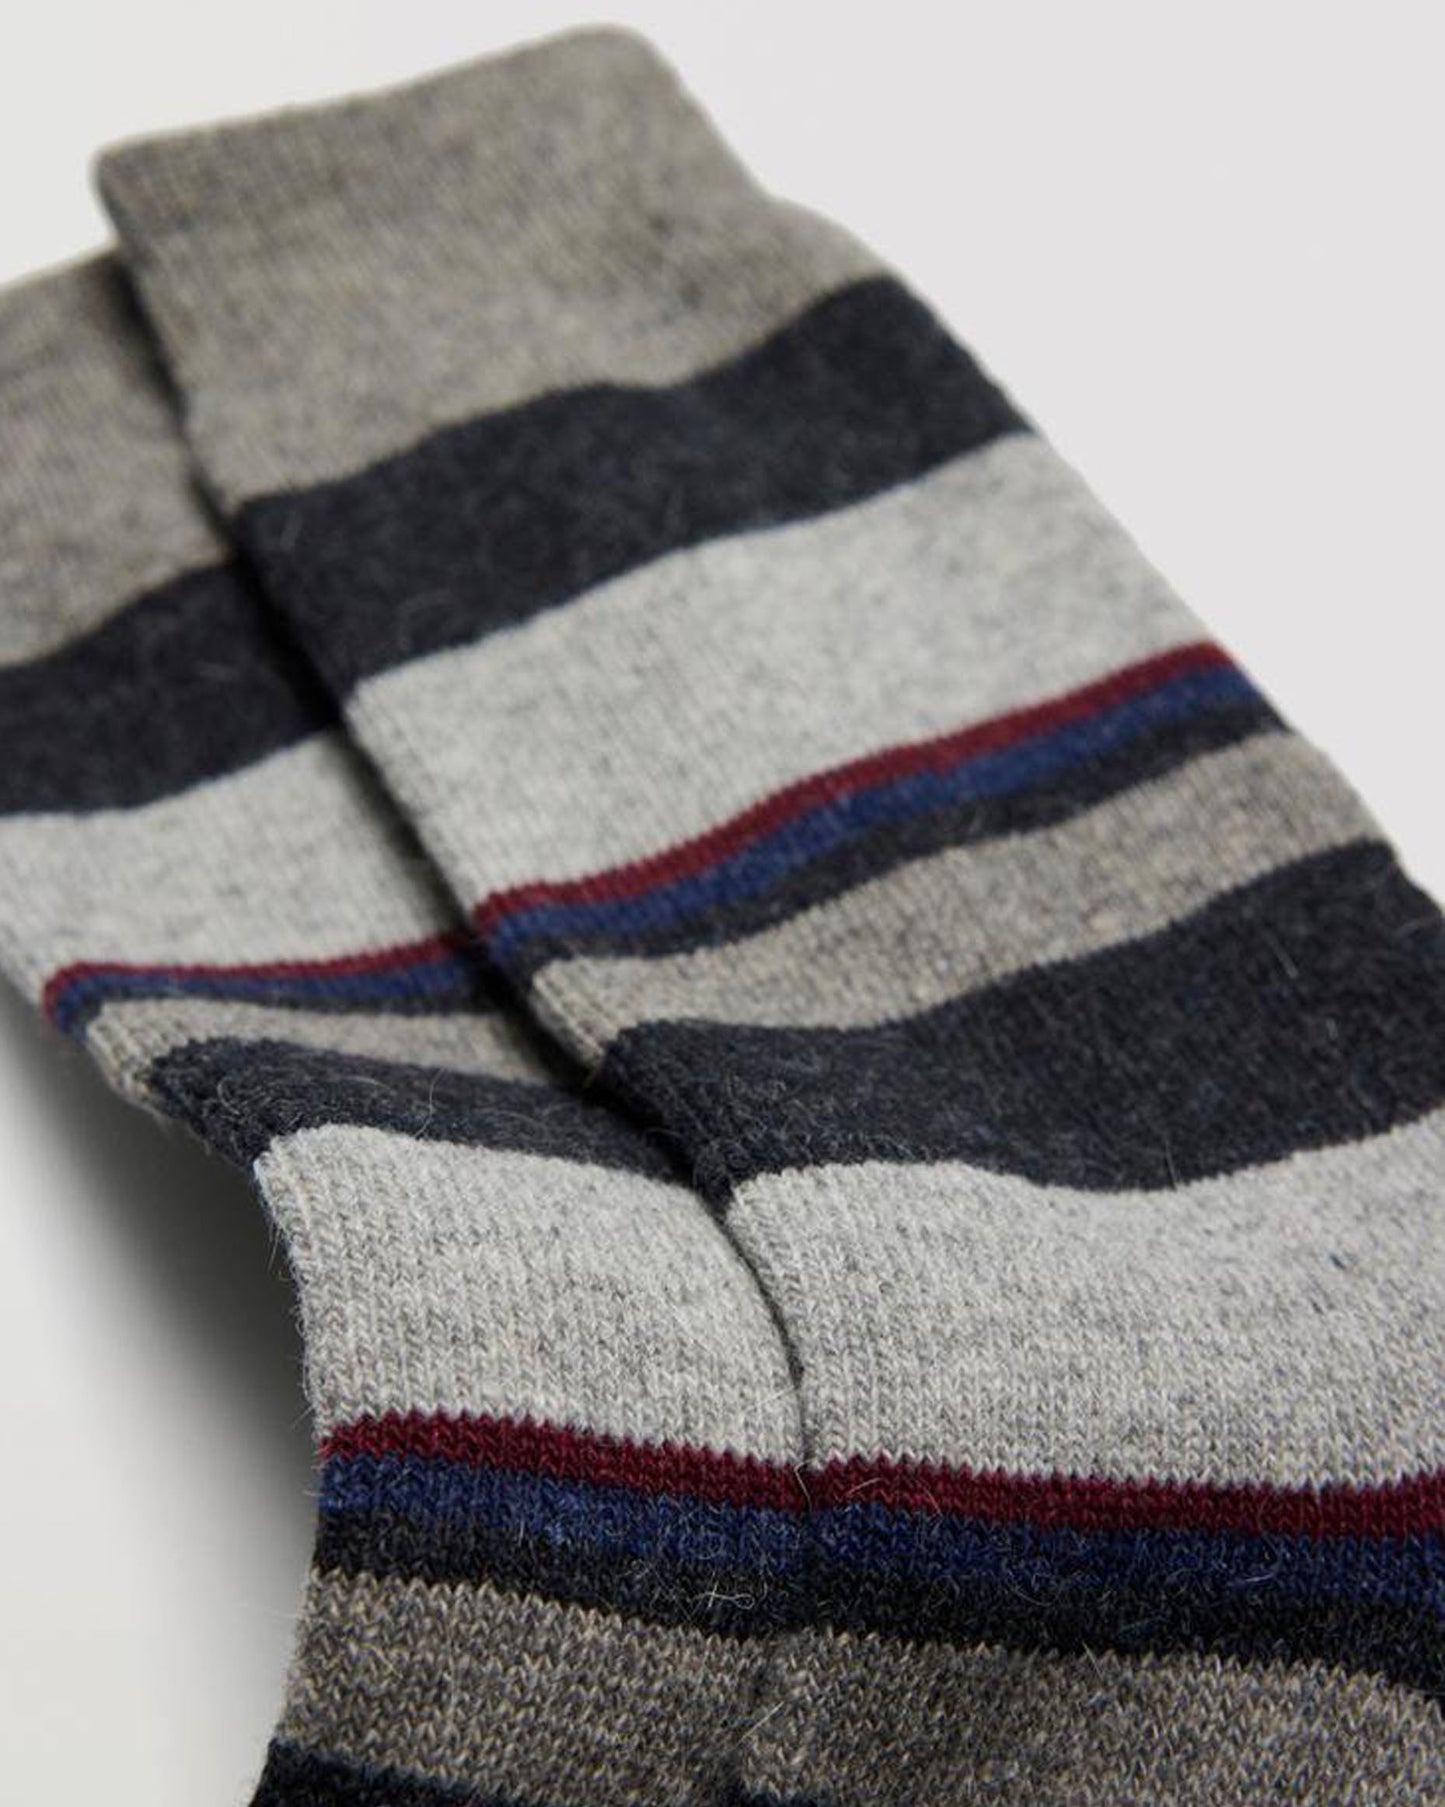 Ysabel Mora 22891 Linear Thermal Sock - Warm wool and angora mix light grey thermal socks with a horizontal stripe pattern in dark grey, navy blue and wine, shaped heel and deep elasticated comfort top.